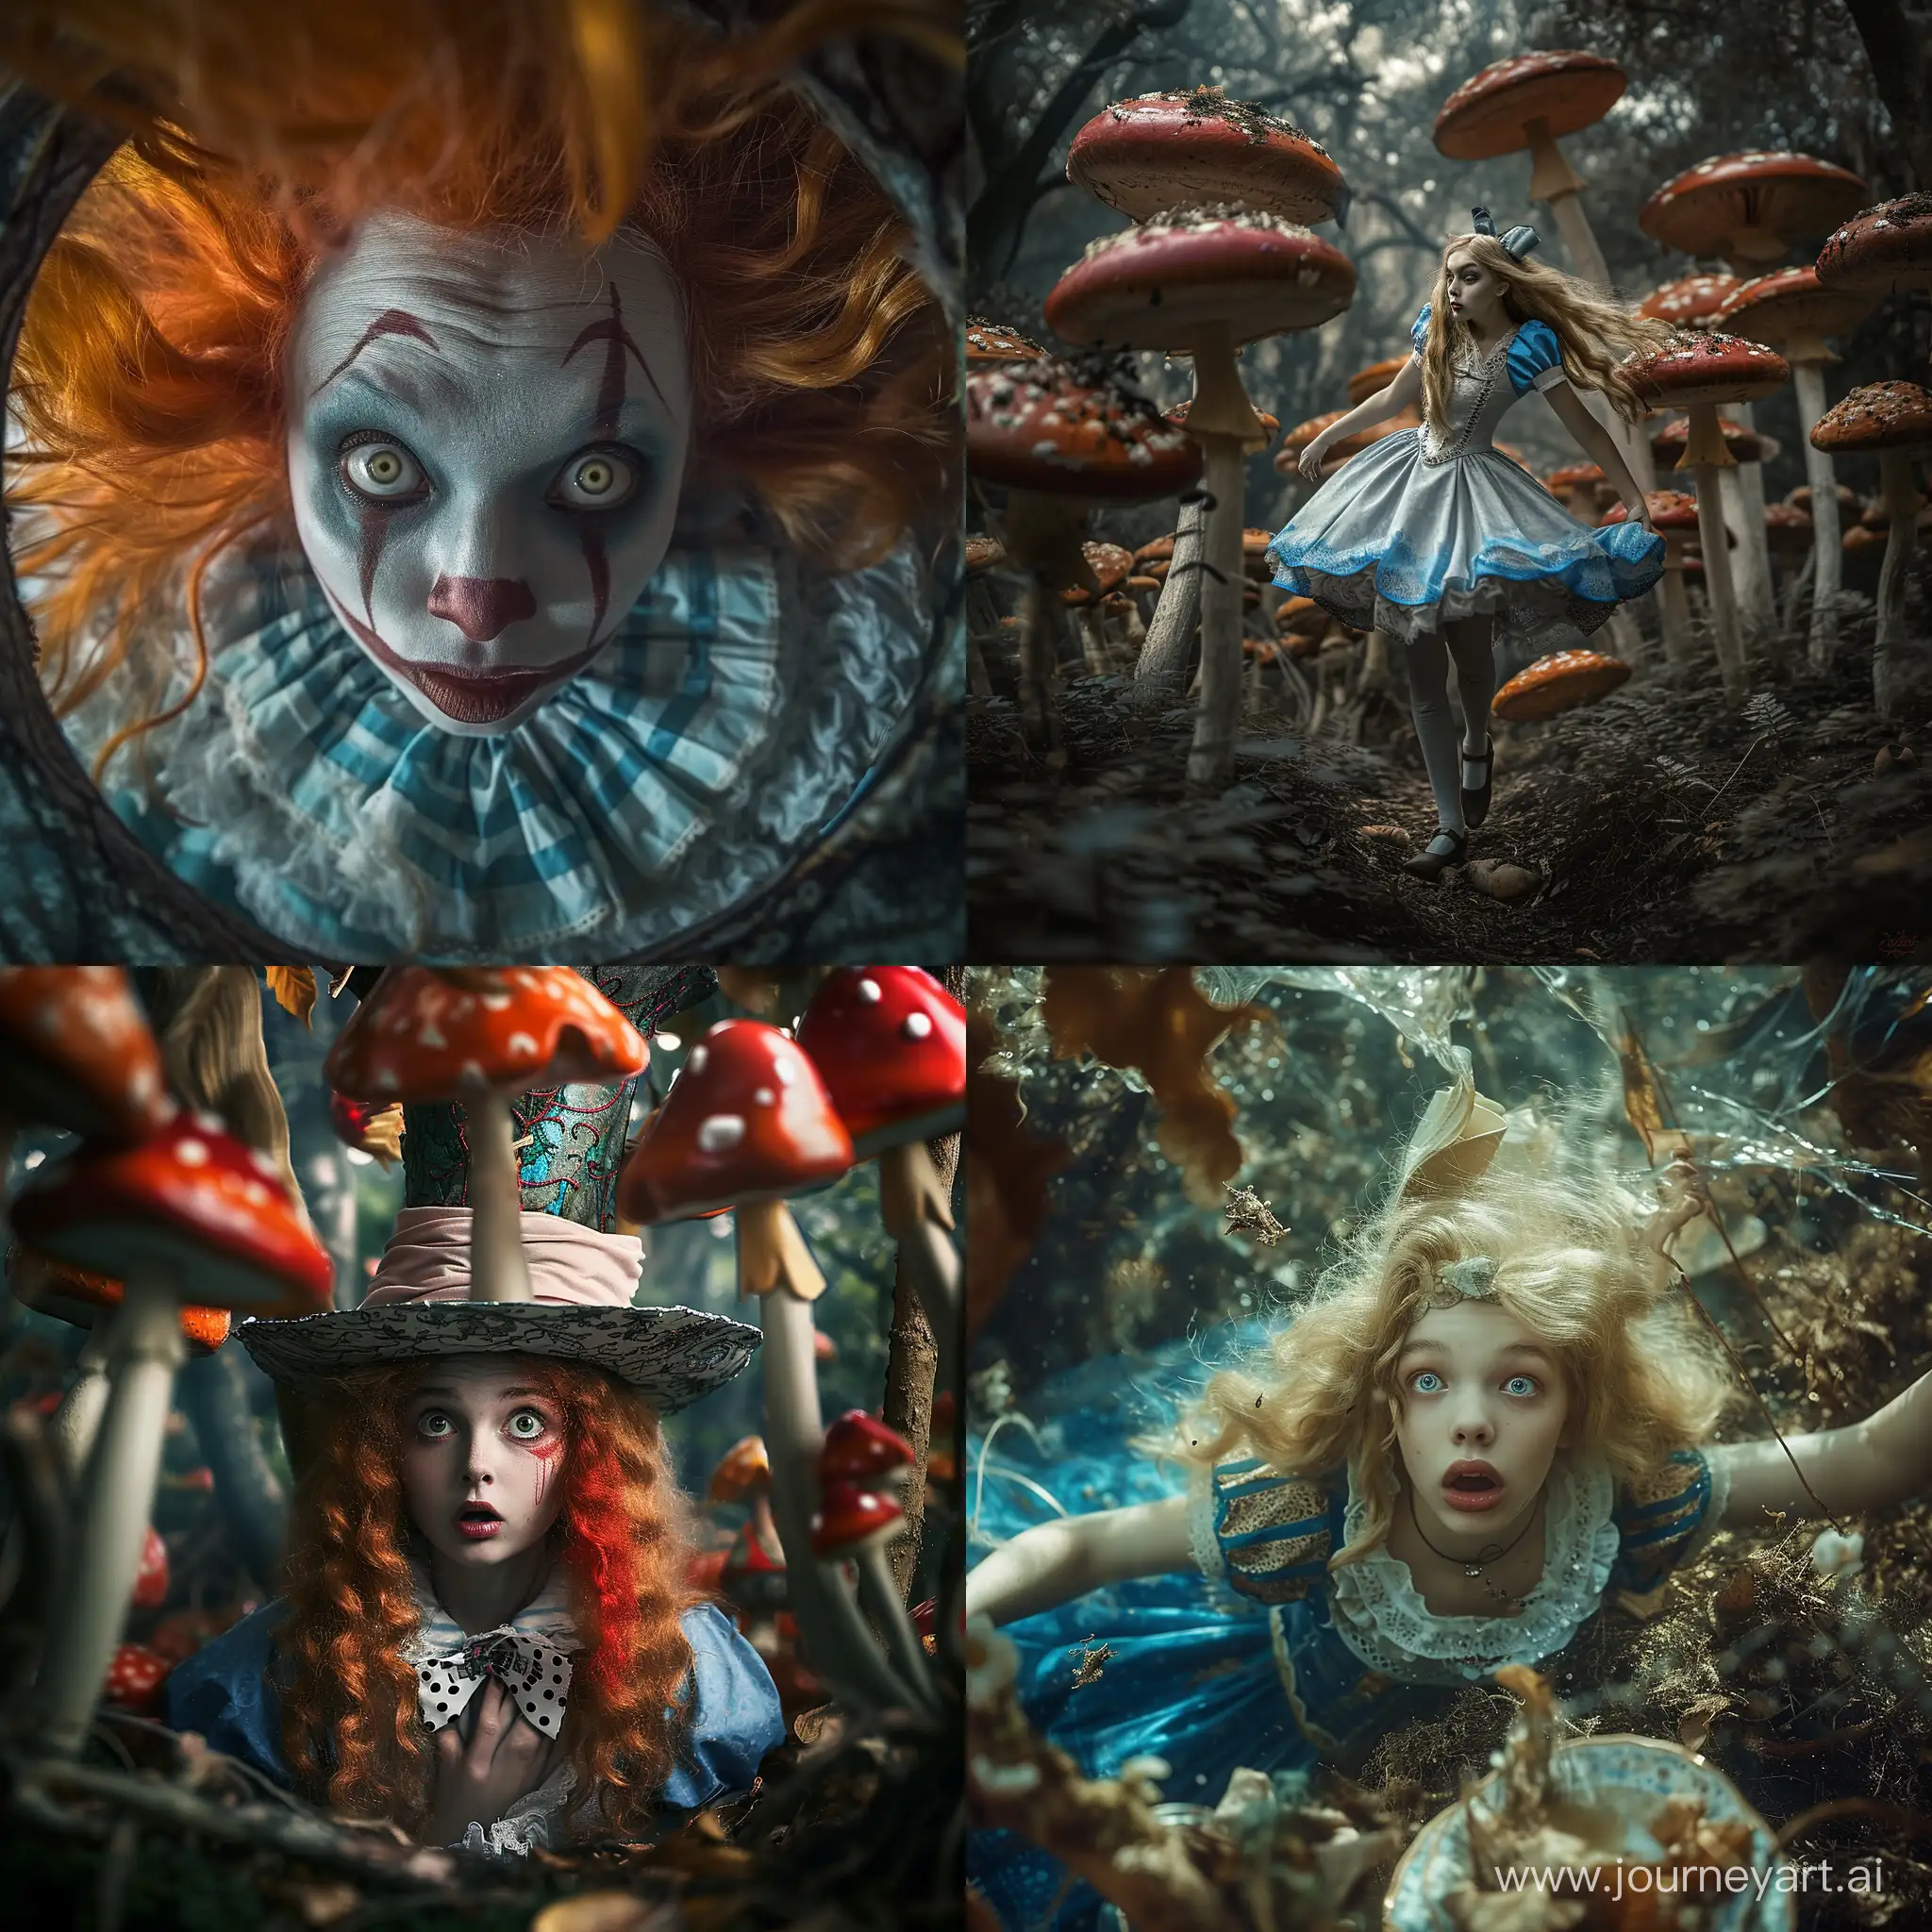 Alice in wonderland unhinged, psychotic, action shots, weird-core, expressive, unique, high - quality, Canon EOS 5D Mark IV DSLR, f/5. 6 aperture, 1/125 second shutter speed, ISO 100, Adobe Photoshop, award - winning, glibatree style, experimental techniques, unusual perspectives, attention to detail 